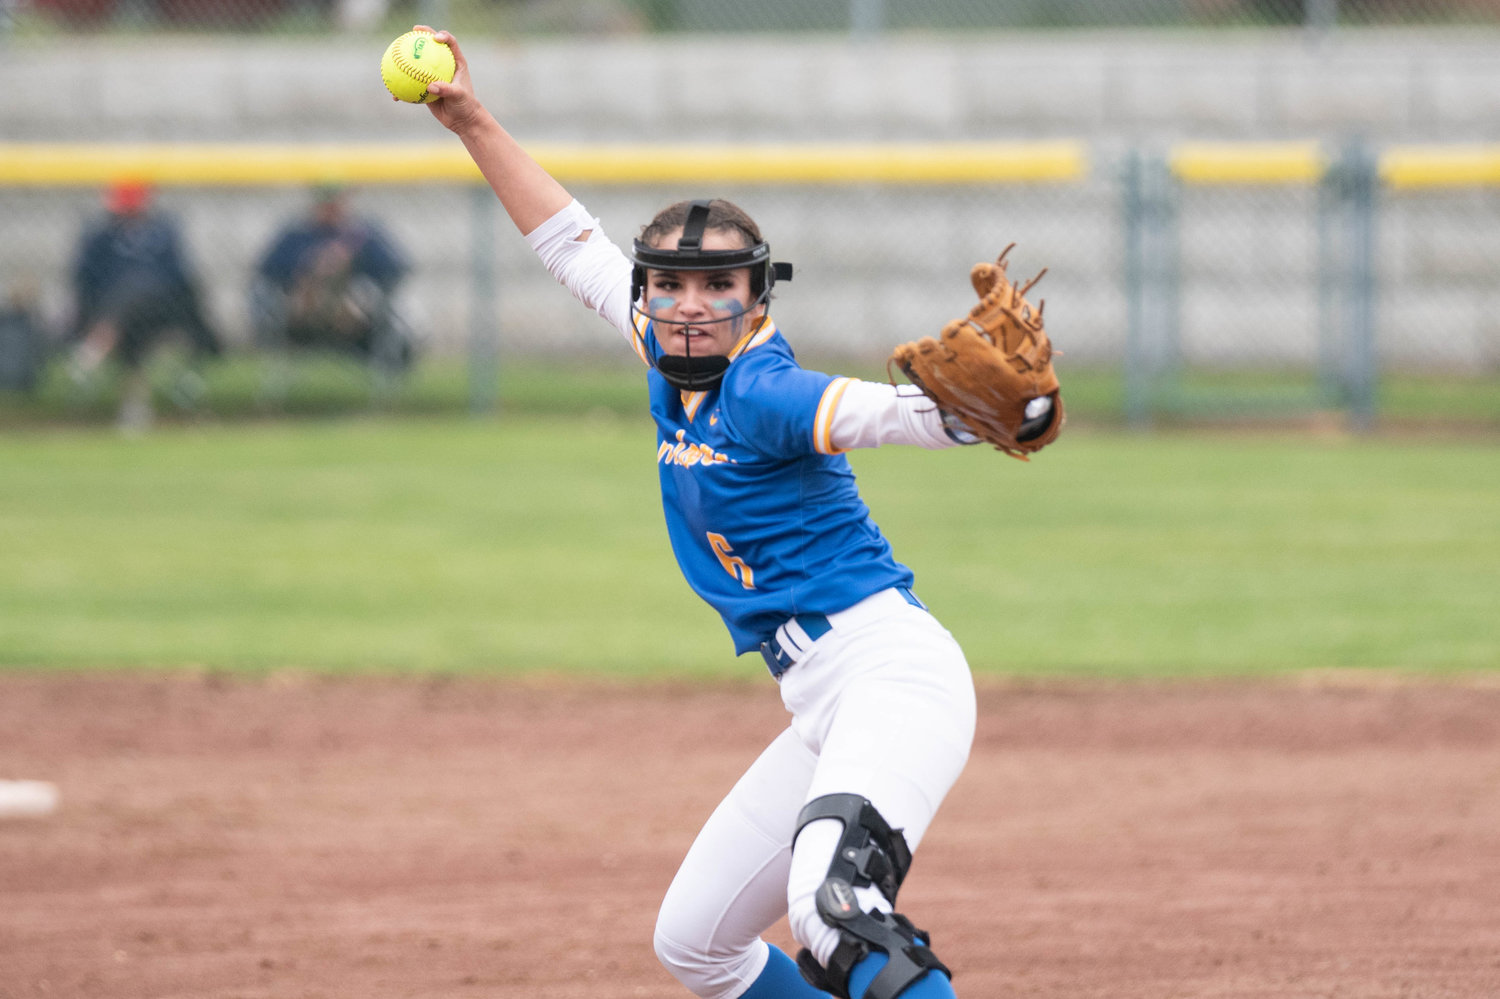 Rochester pitcher Sadie Knutson winds up to deliver a pitch against Lynden in the first round of the 2A State Softball Tournament at Carlon Park in Selah May 27.